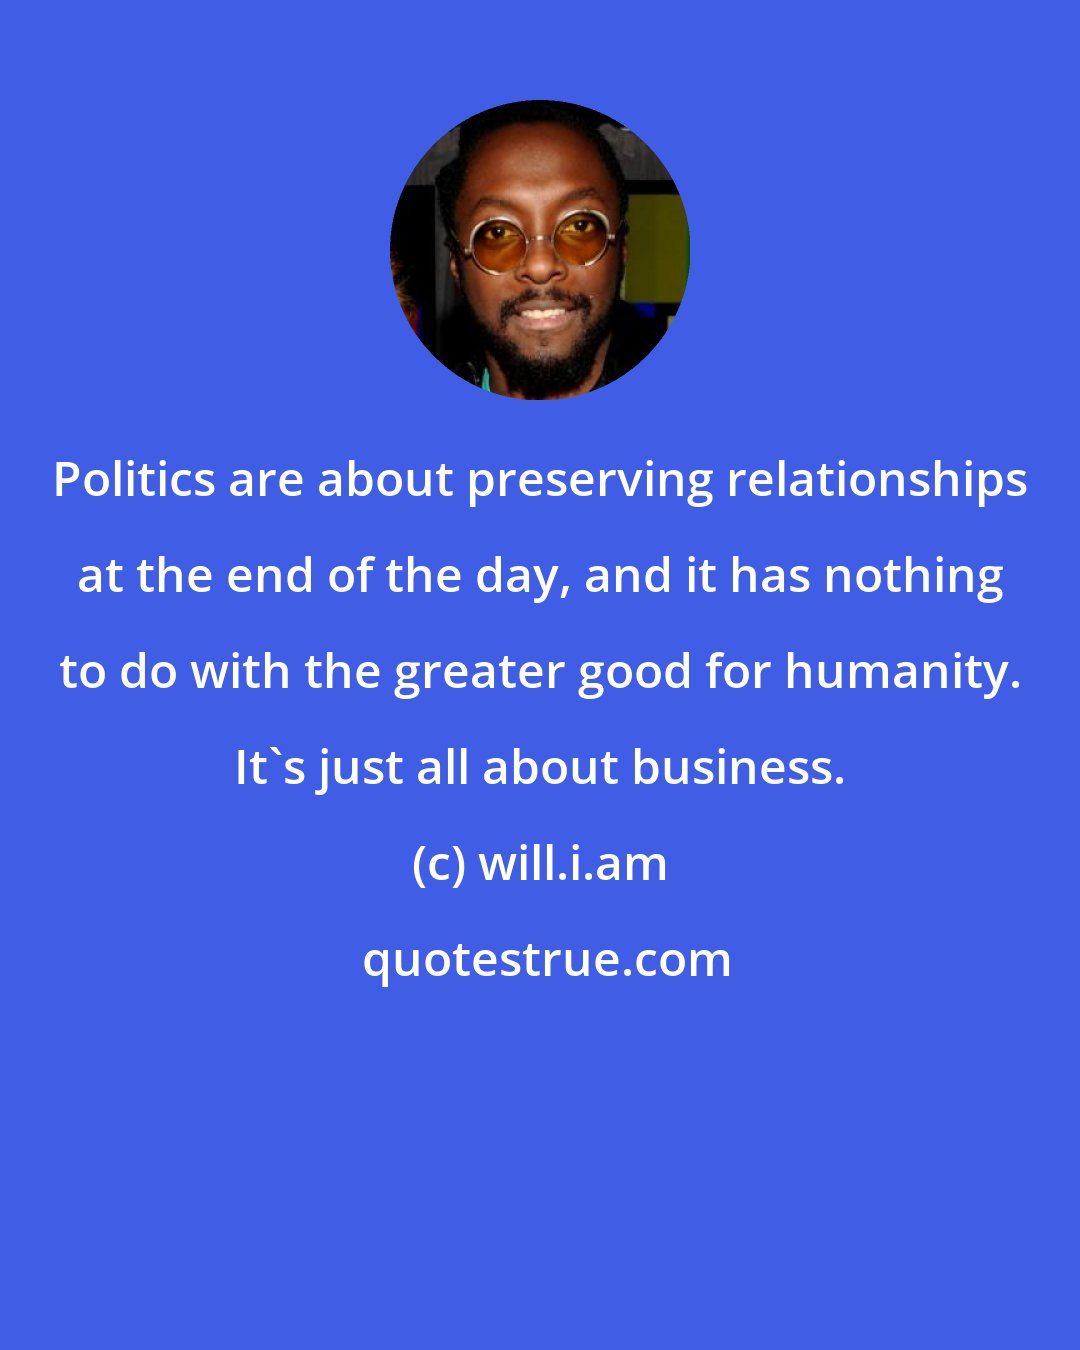 will.i.am: Politics are about preserving relationships at the end of the day, and it has nothing to do with the greater good for humanity. It's just all about business.